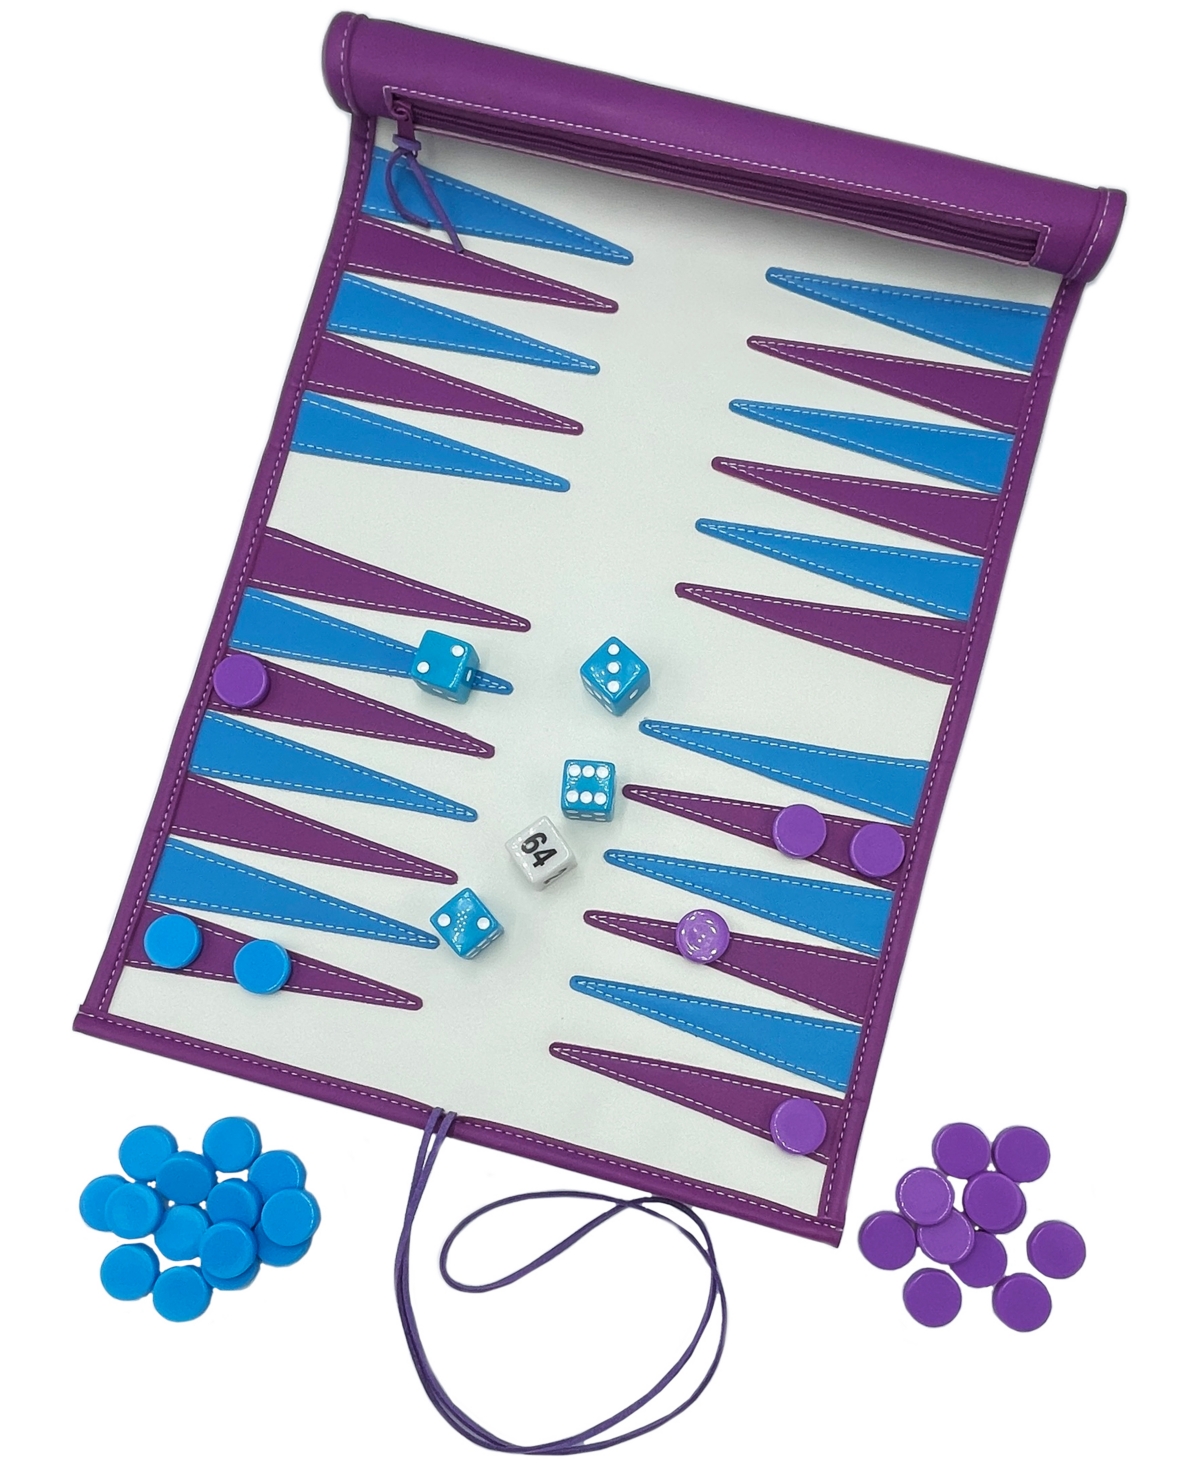 Shop Areyougame On-the-go Travel Games Chess, Backgammon, Checkers Set, 39 Piece In Multi Color